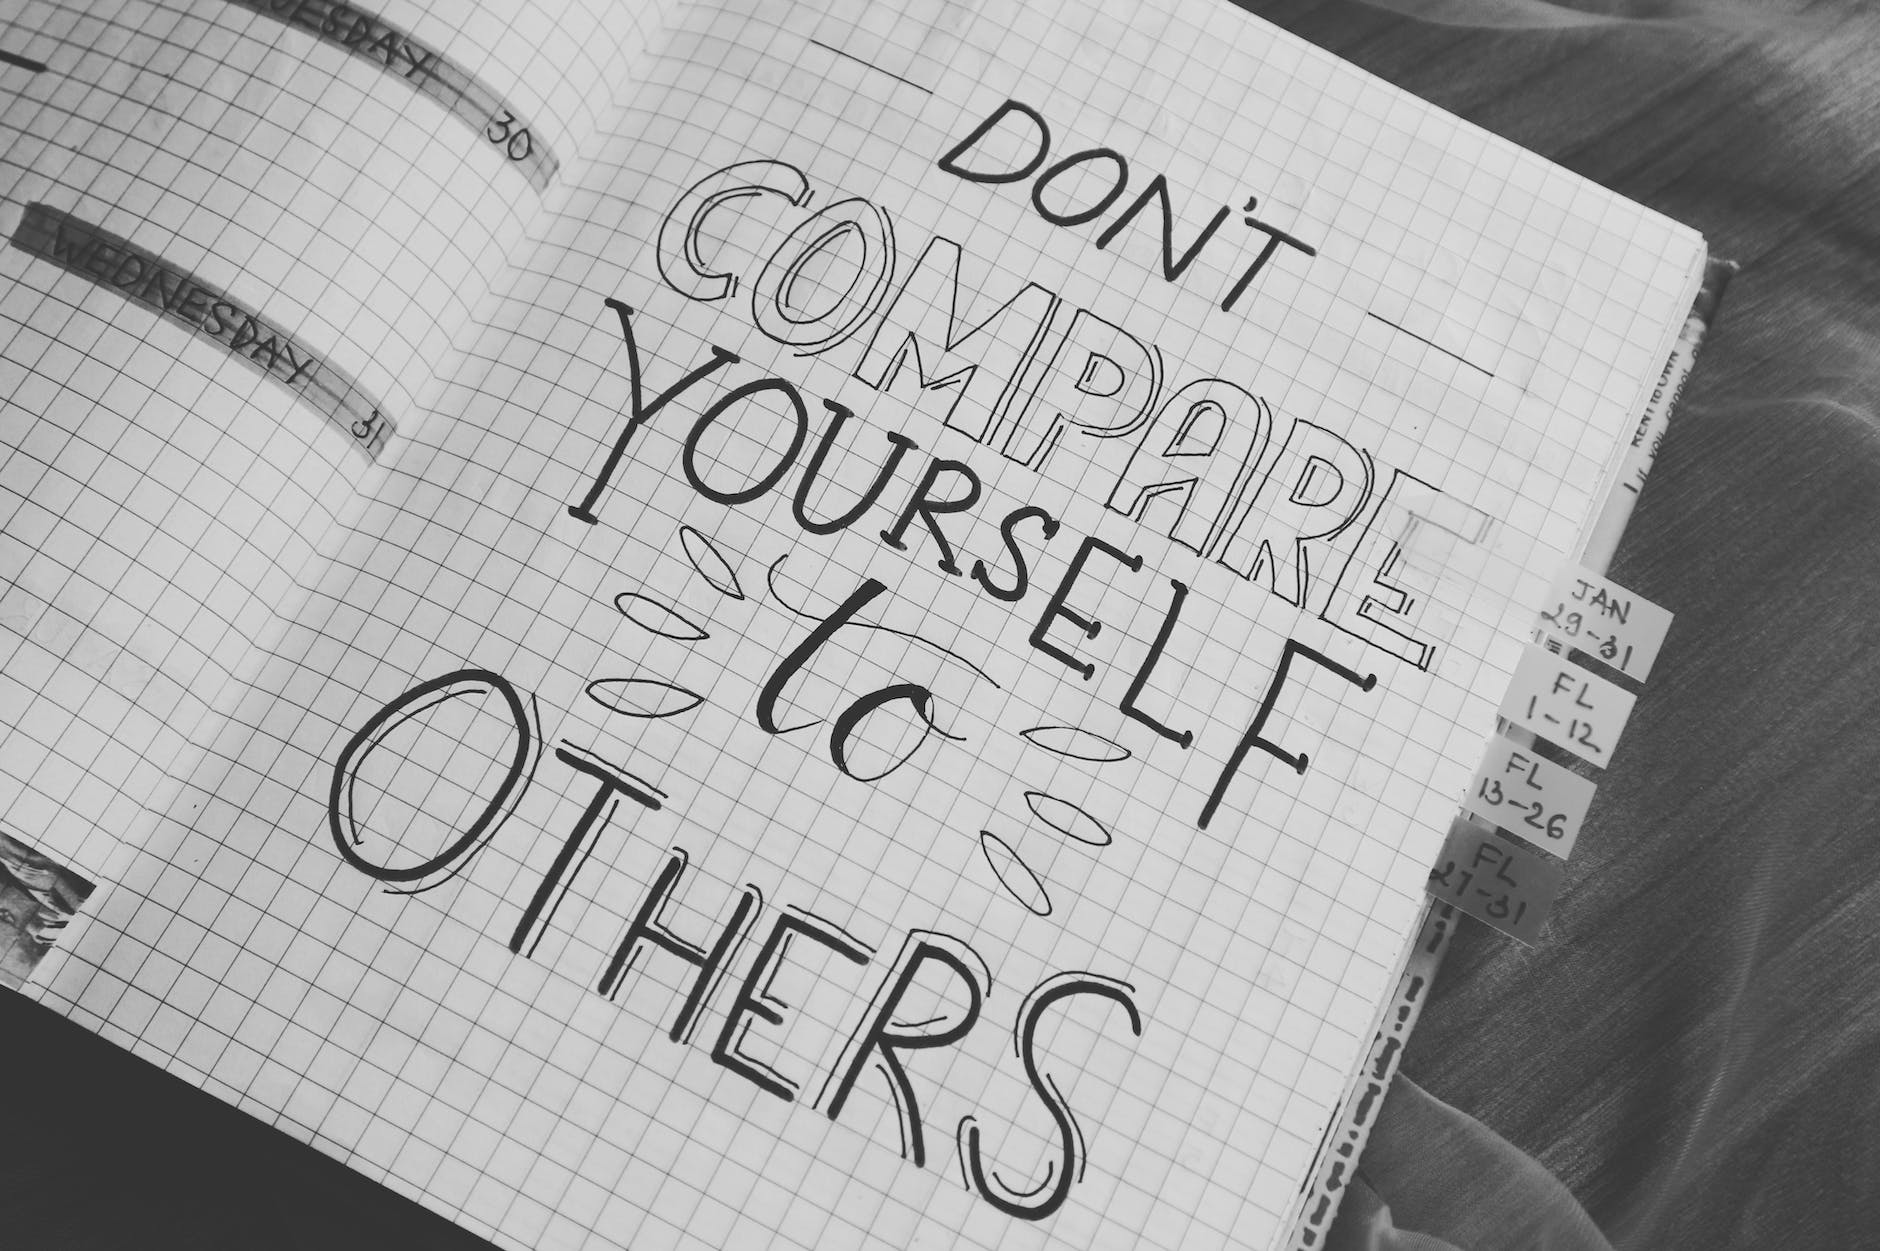 Image says Don't compare yourself to others.